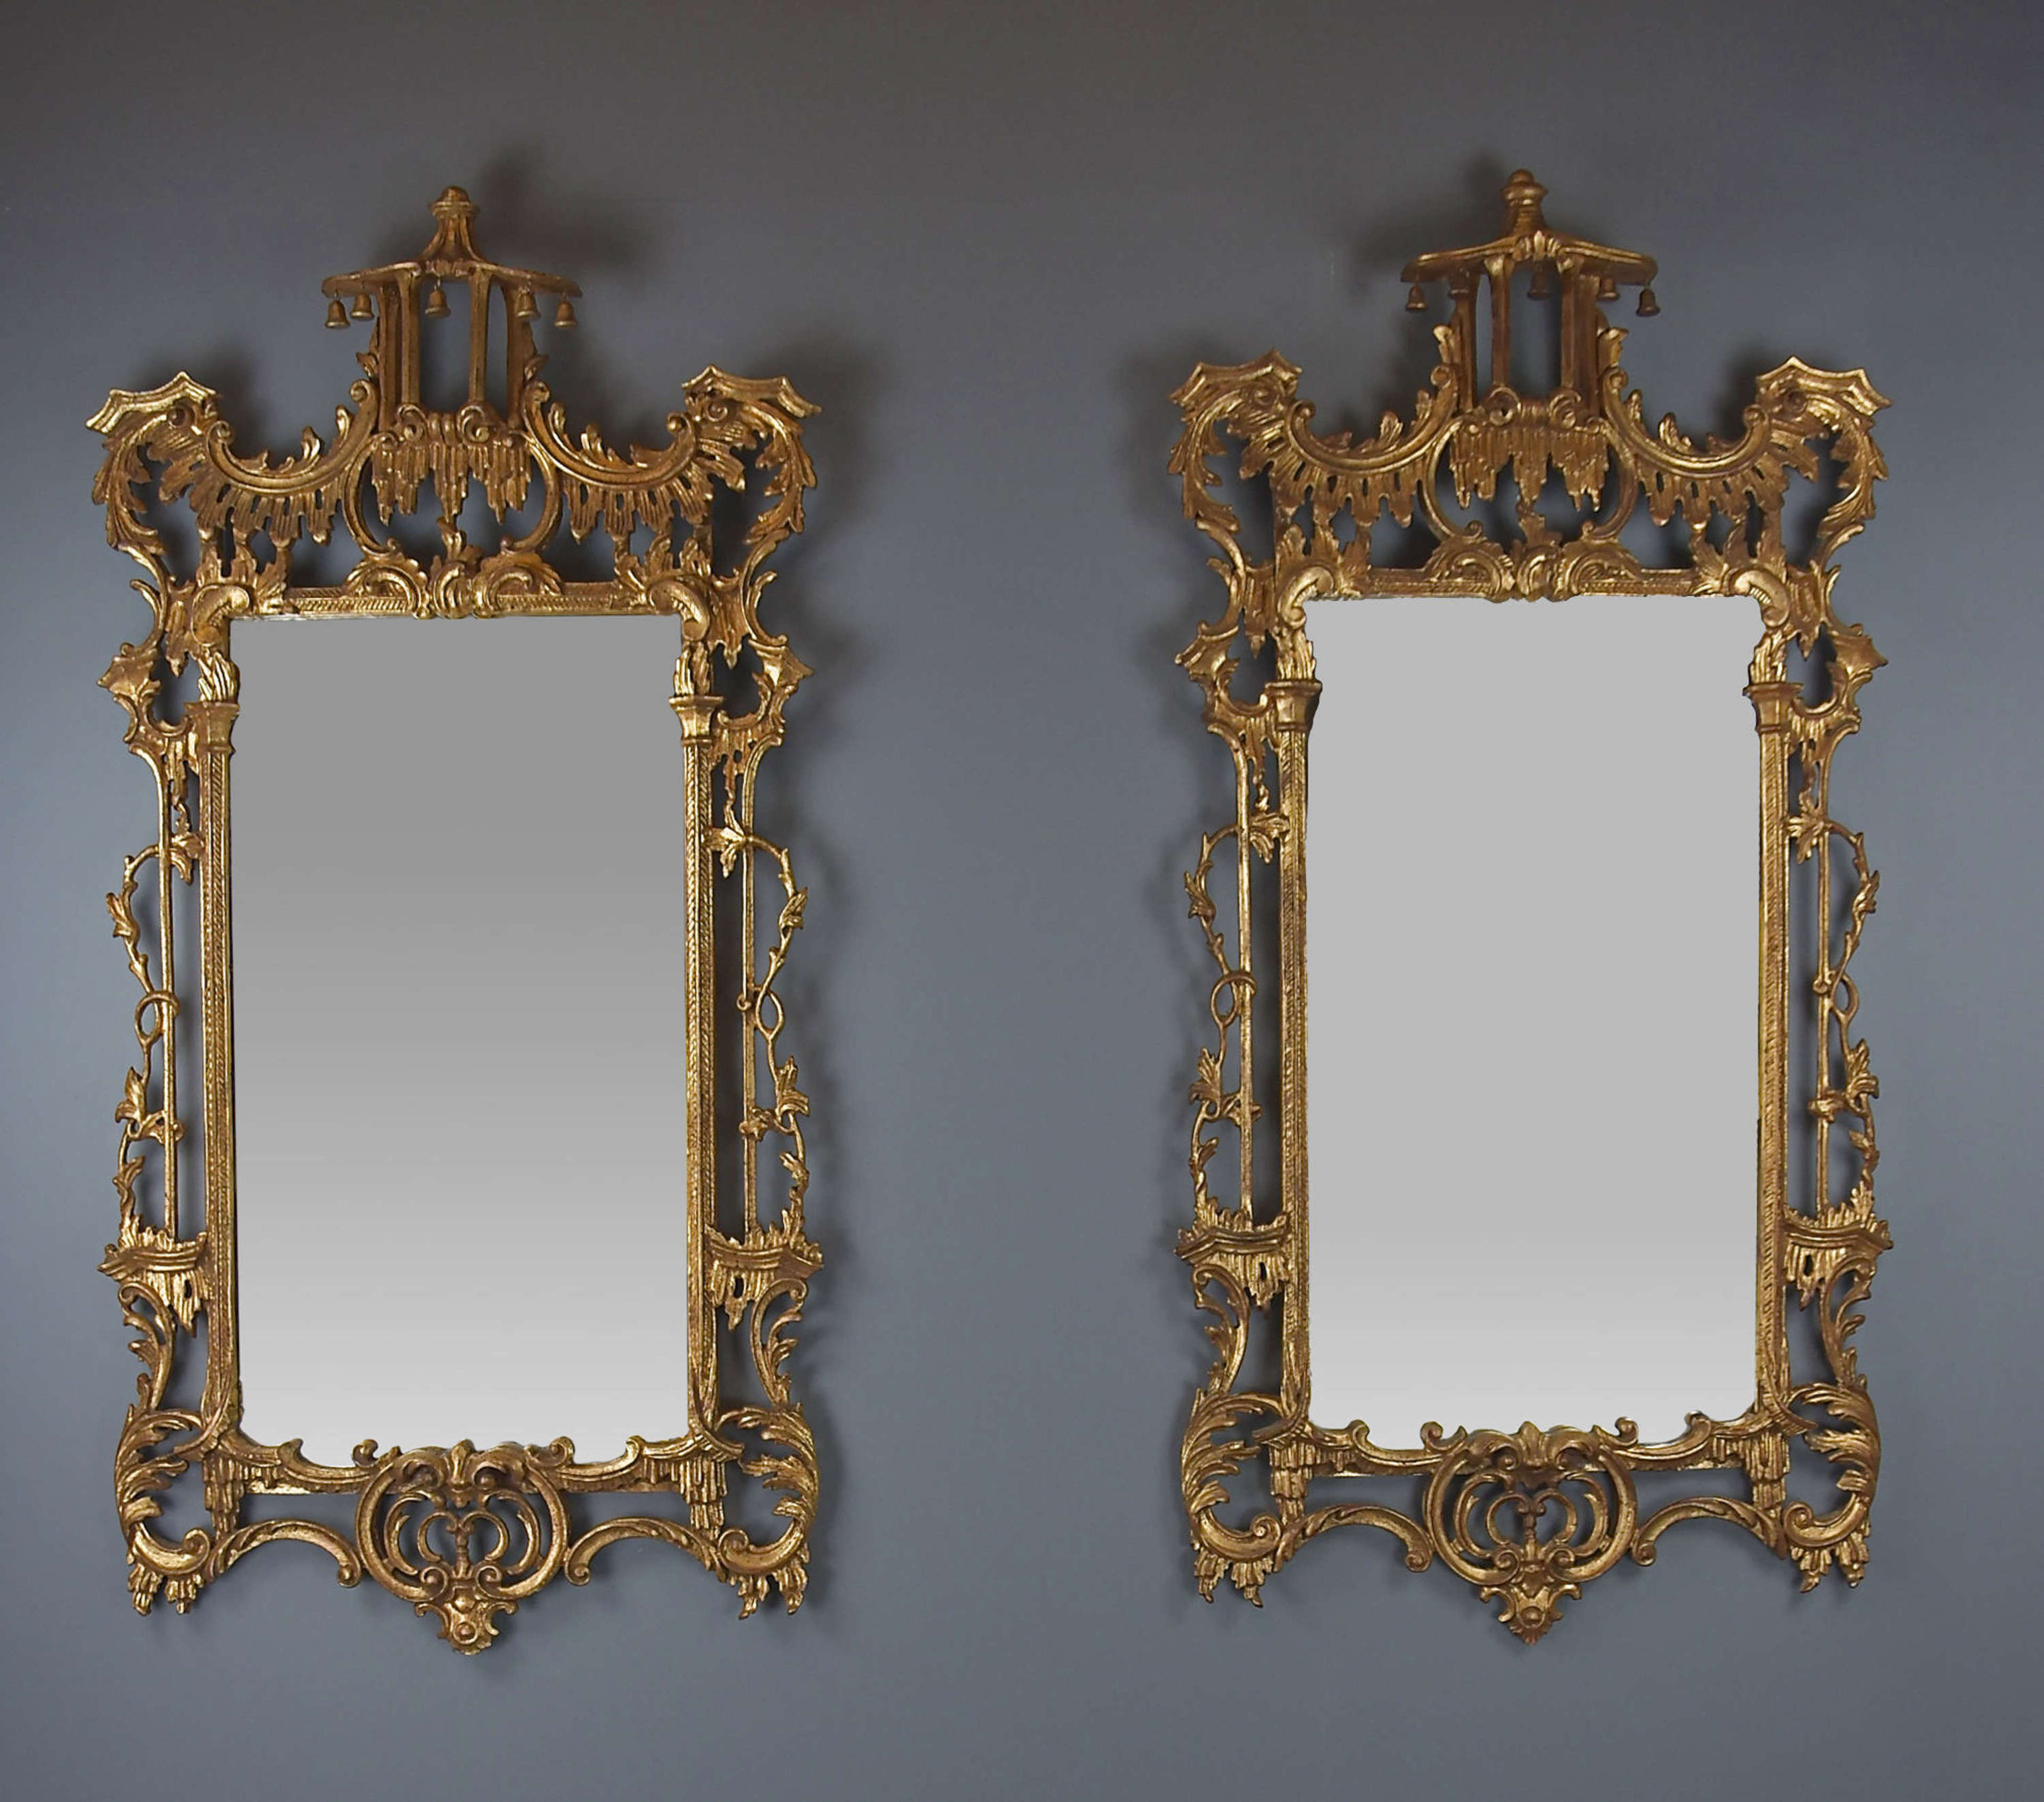 Pair of fine quality Chinese Chippendale style carved giltwood mirrors